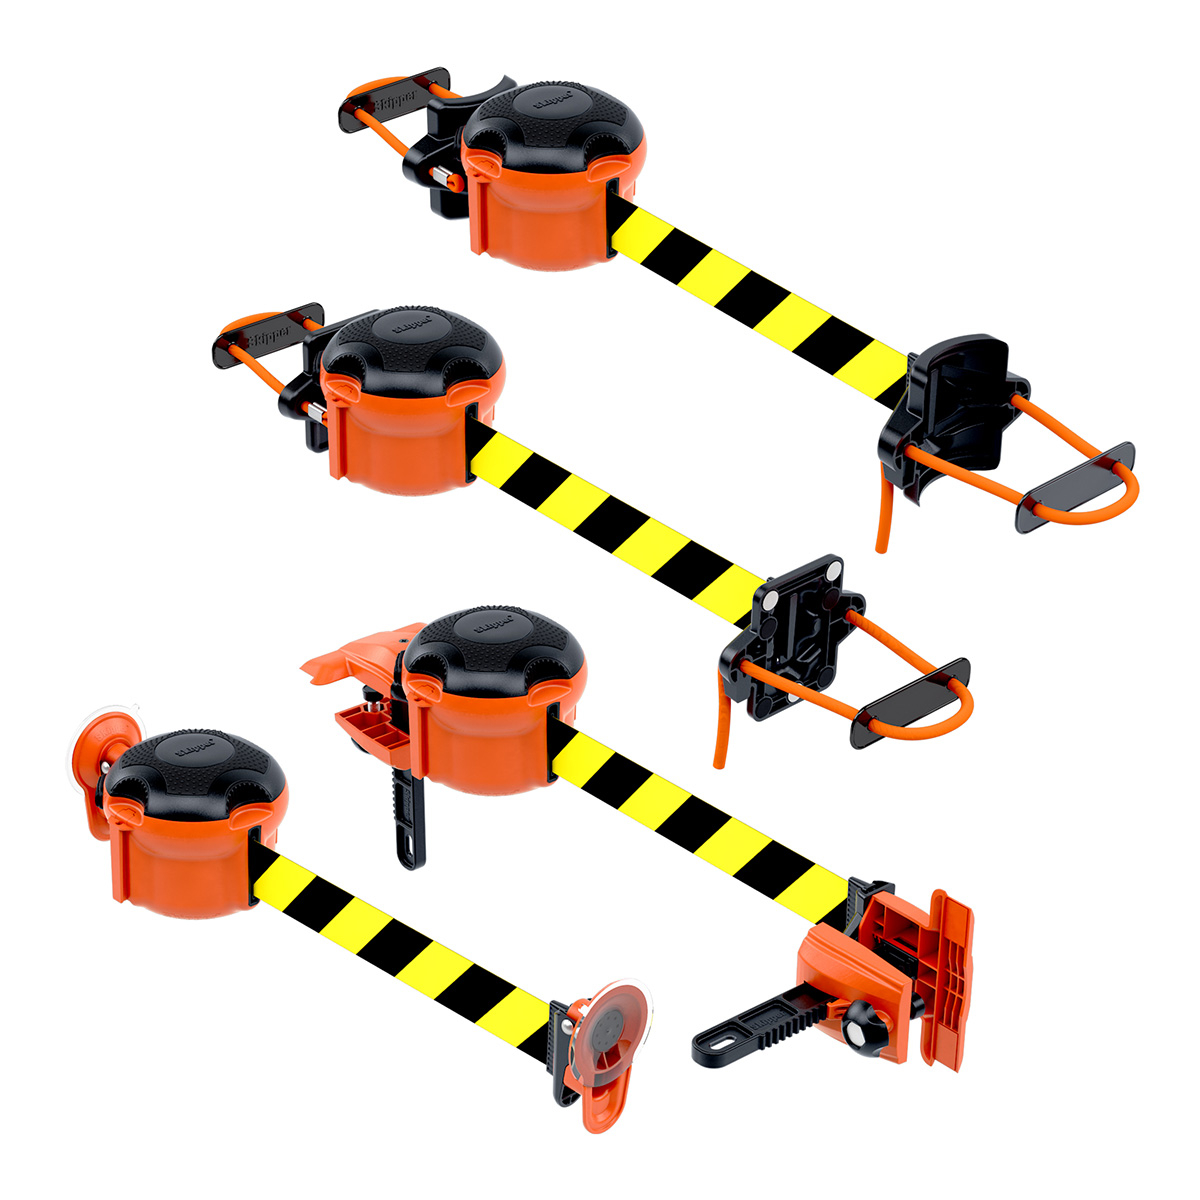 Skipper XS Retractable Safety Barrier With Different Attachment And Fixing Options